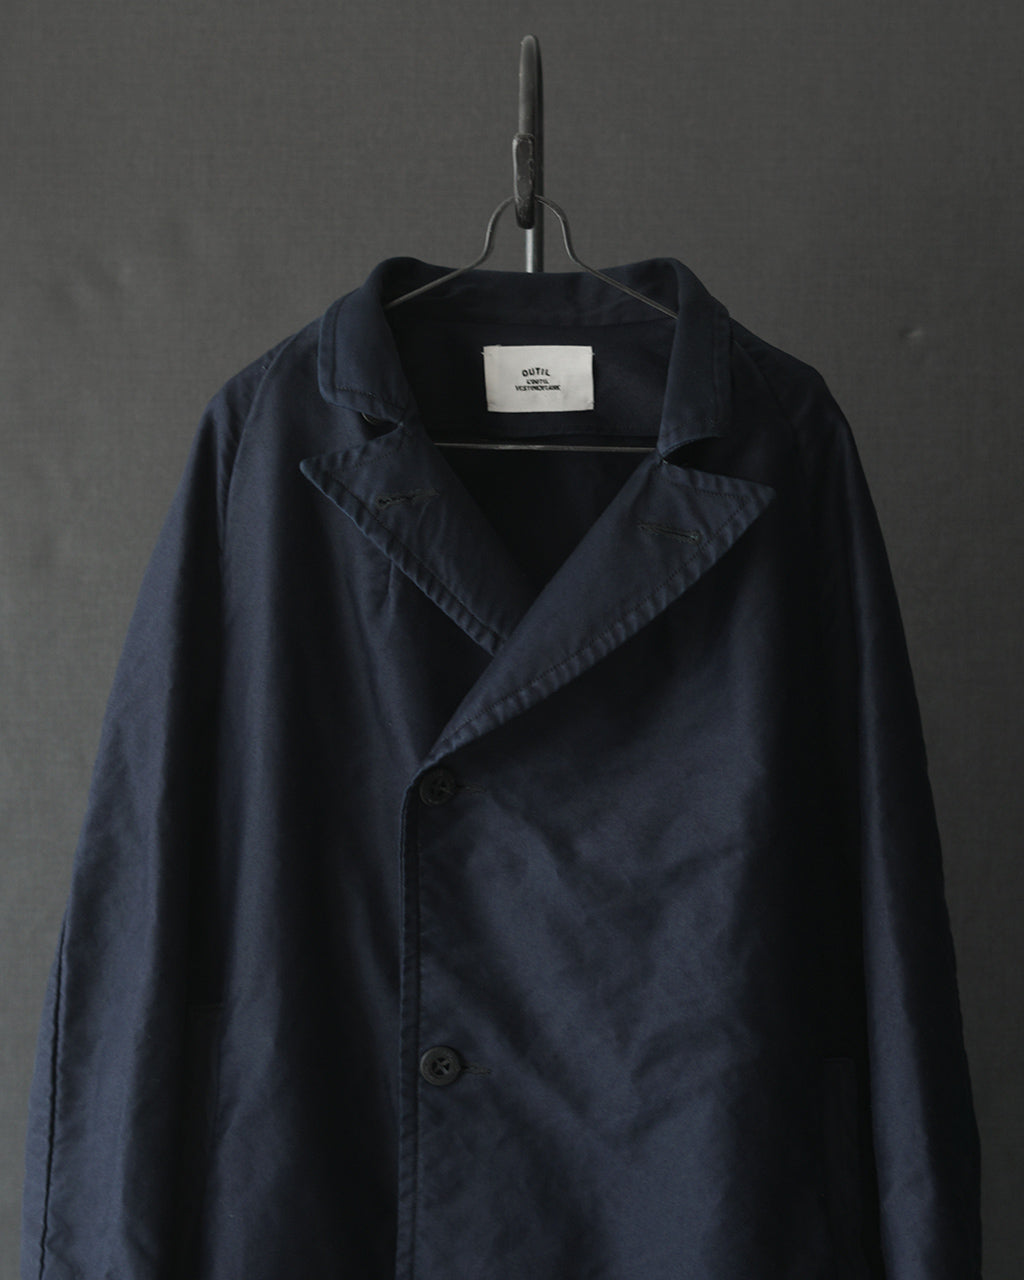 Outil ウティ モールスキンコート manteau Loulle OU-T015 【送料無料】